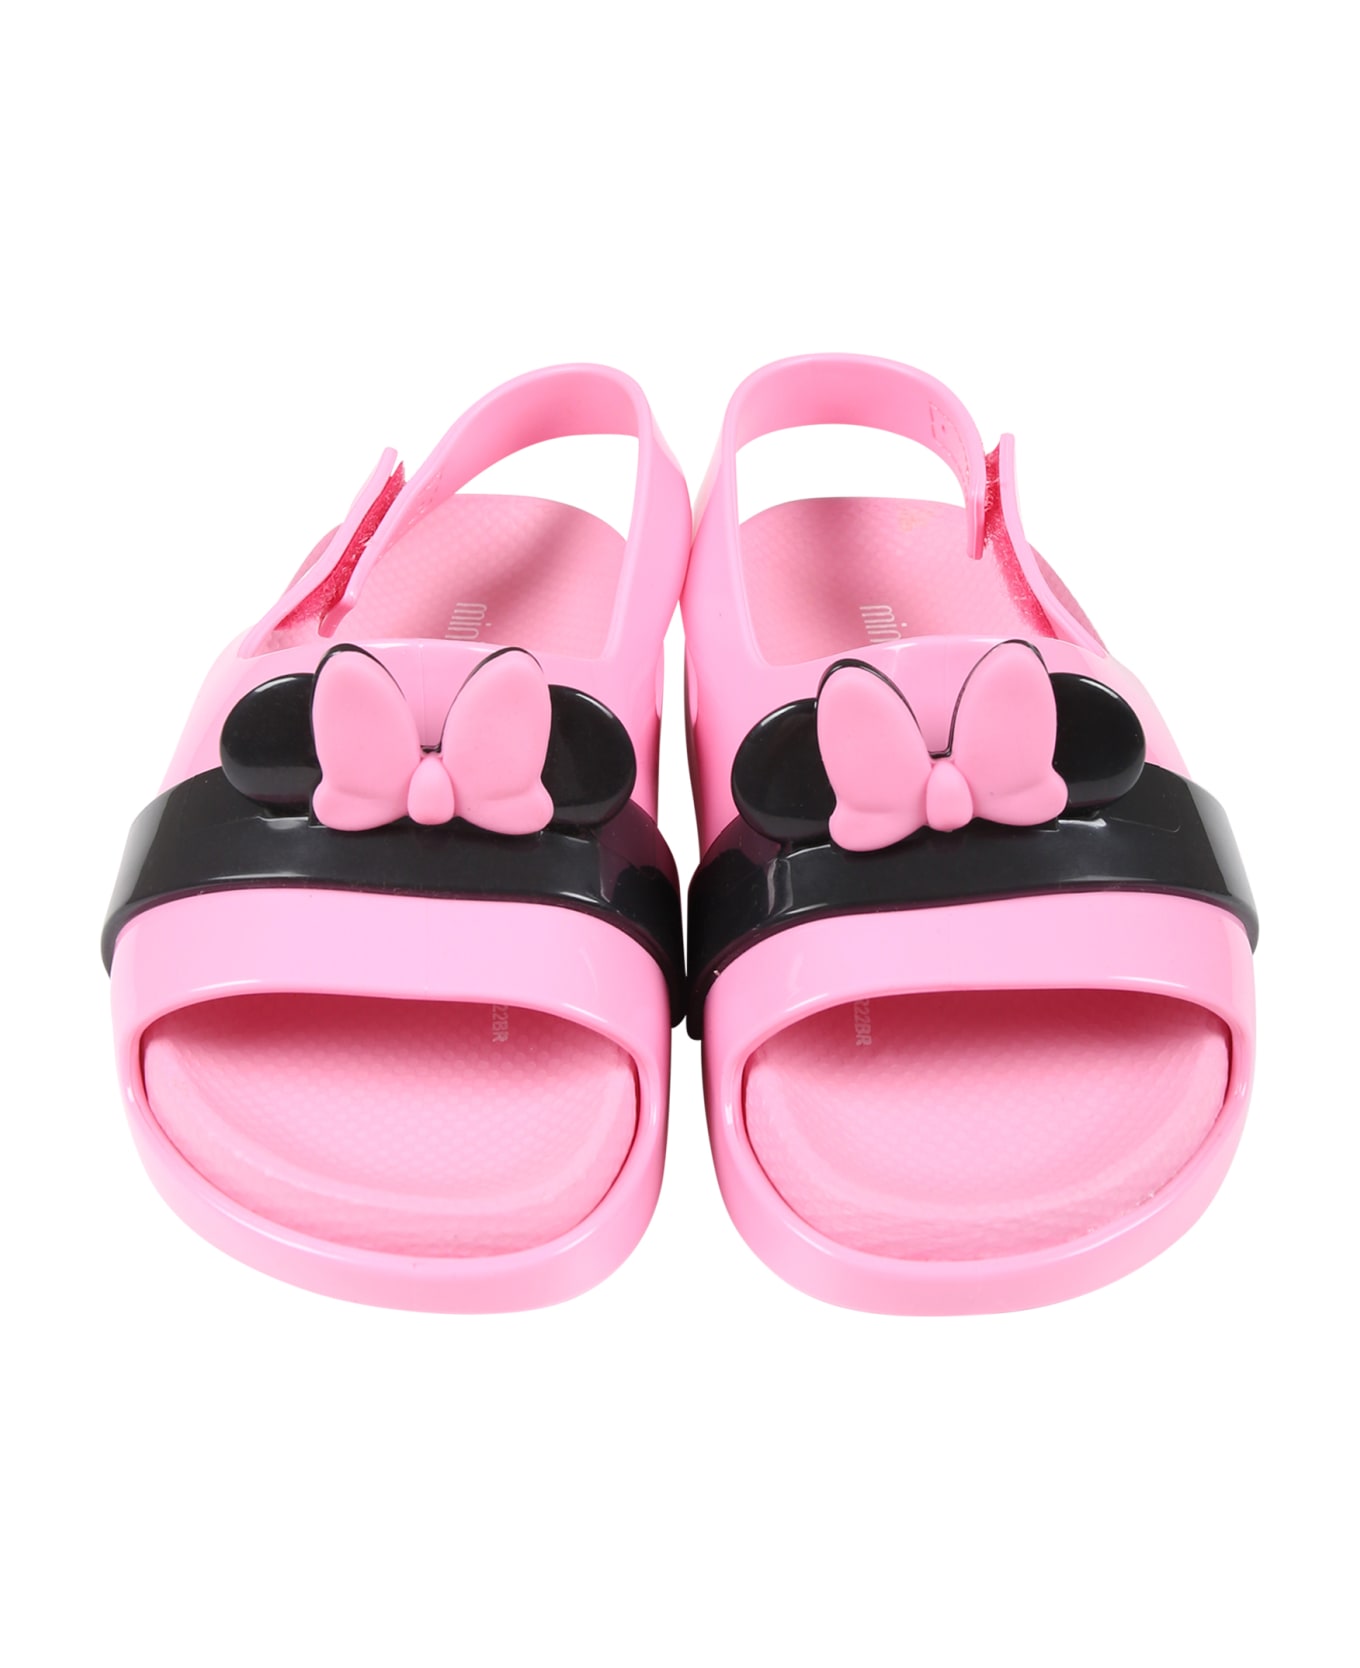 Melissa Pink Sandals For Girl With Minnie Ears - Pink シューズ